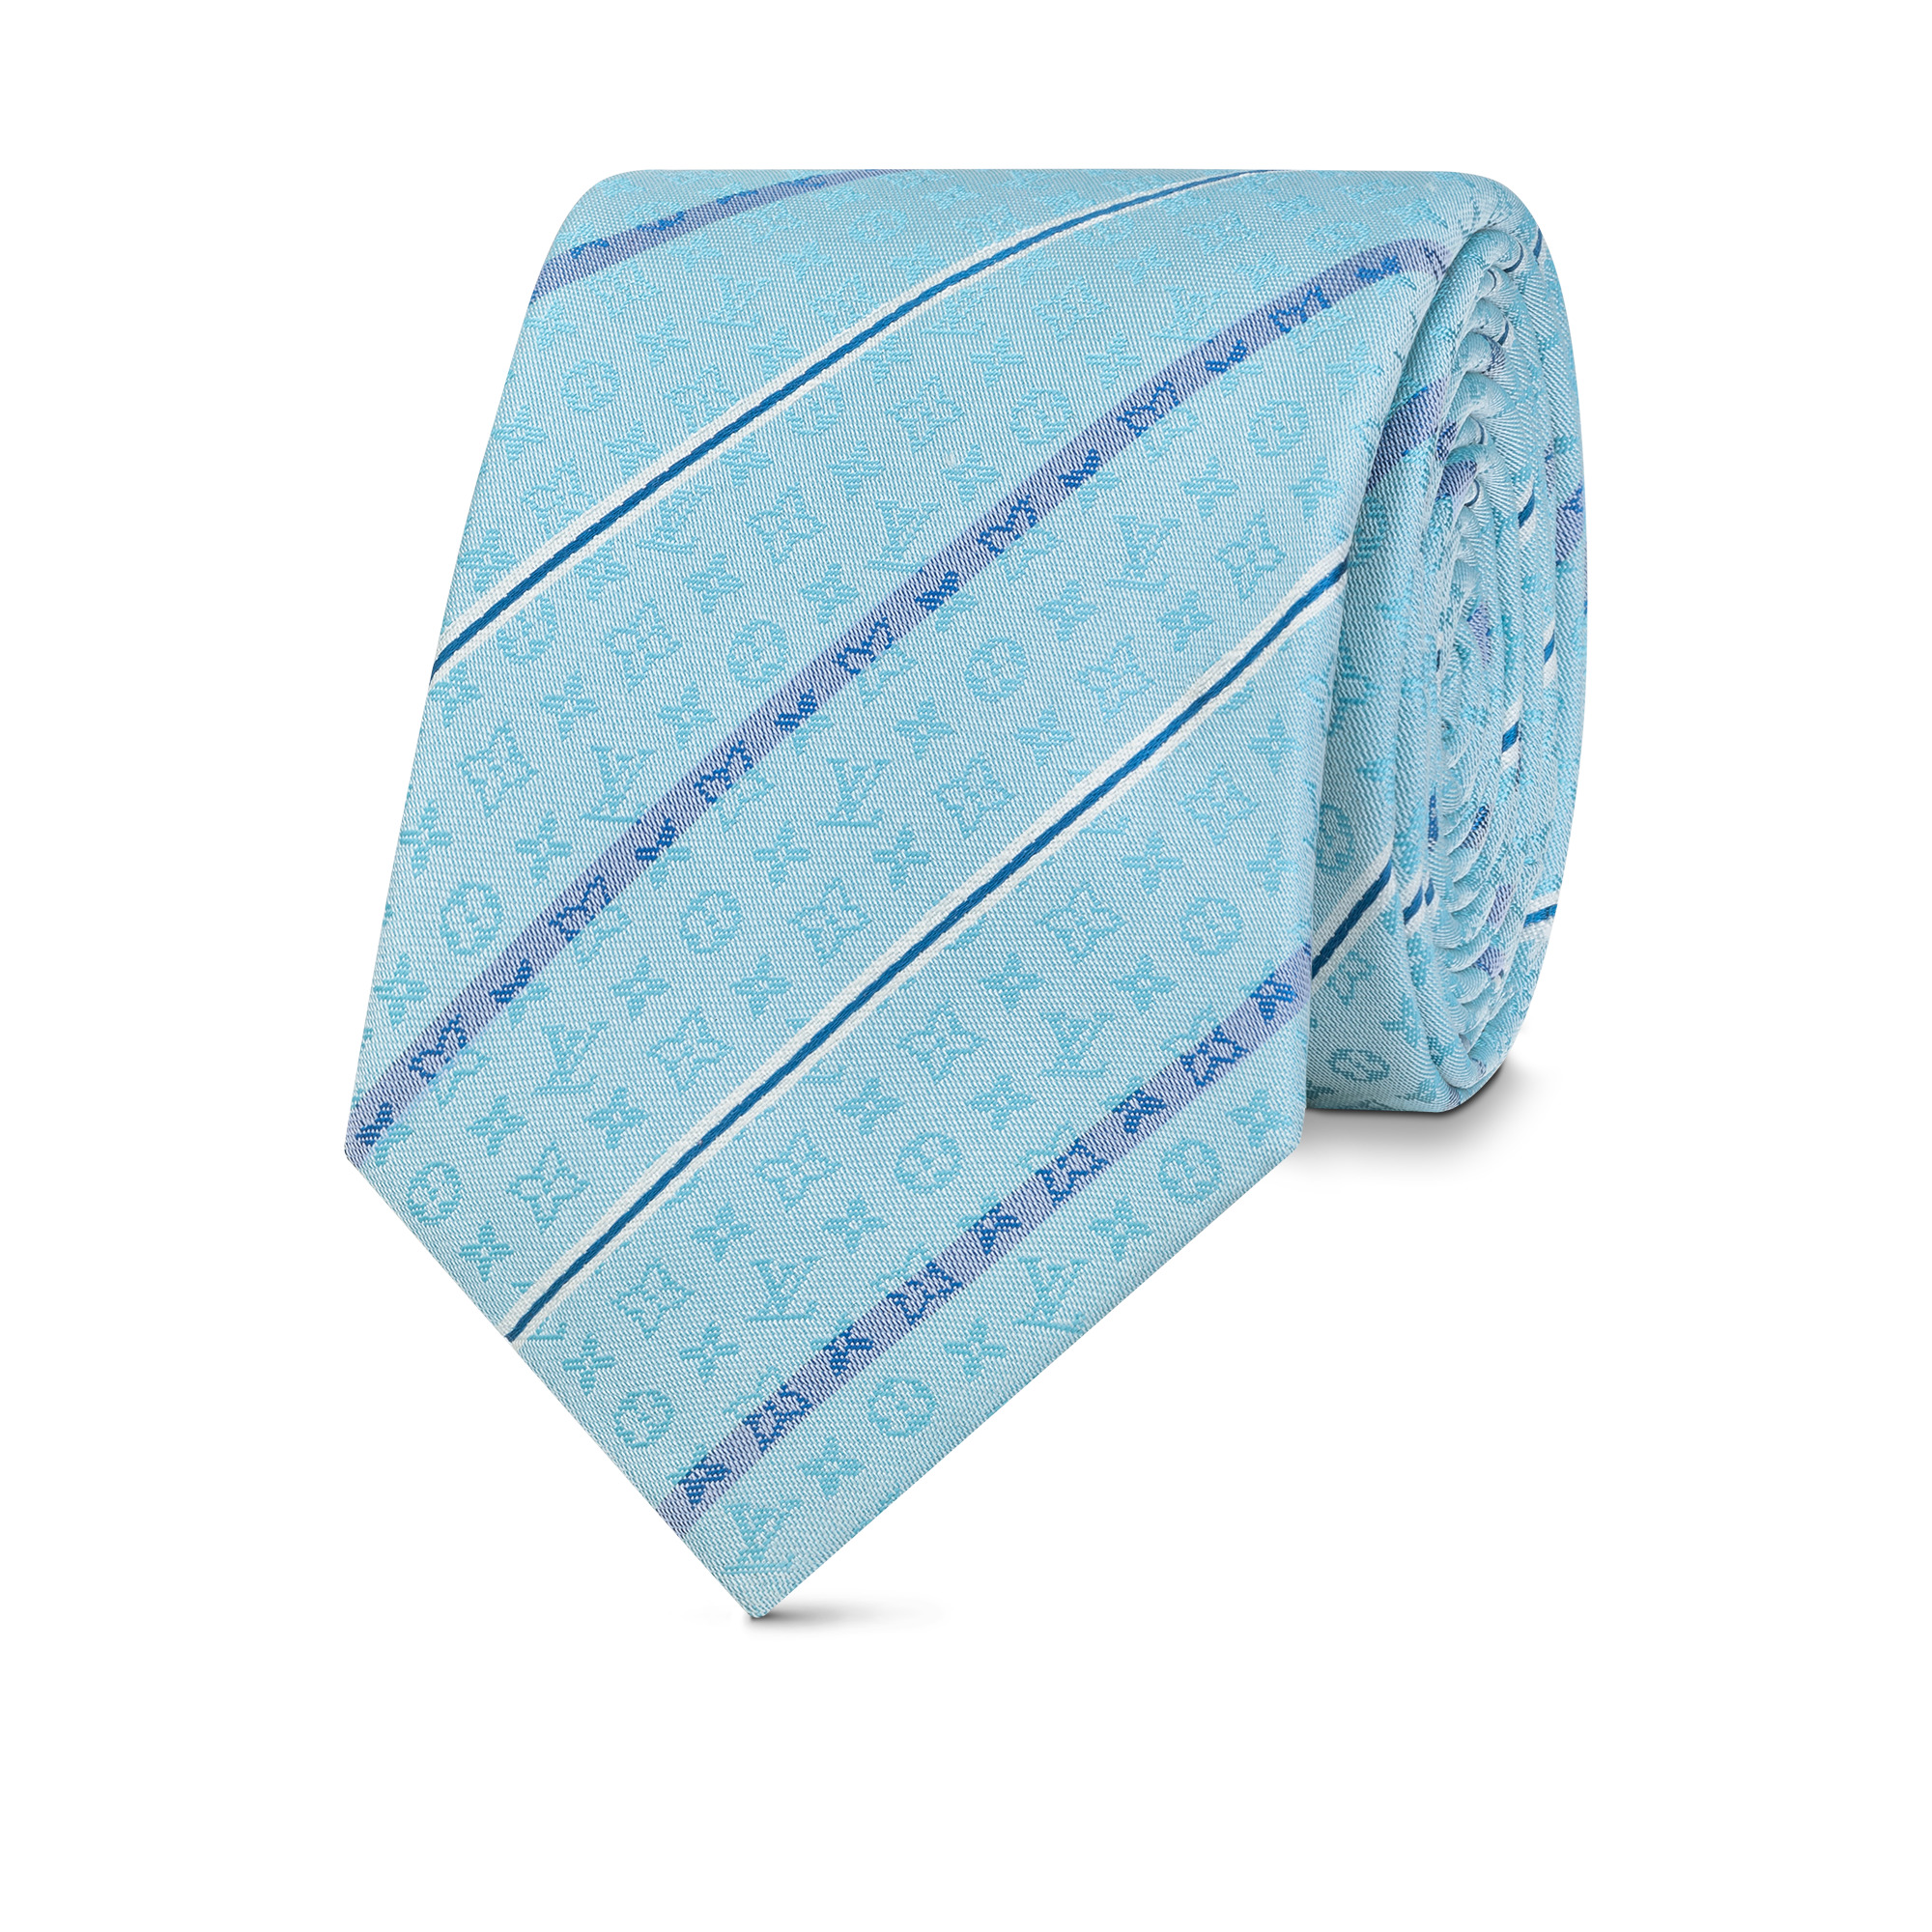 Lined Stripes Tie - 4